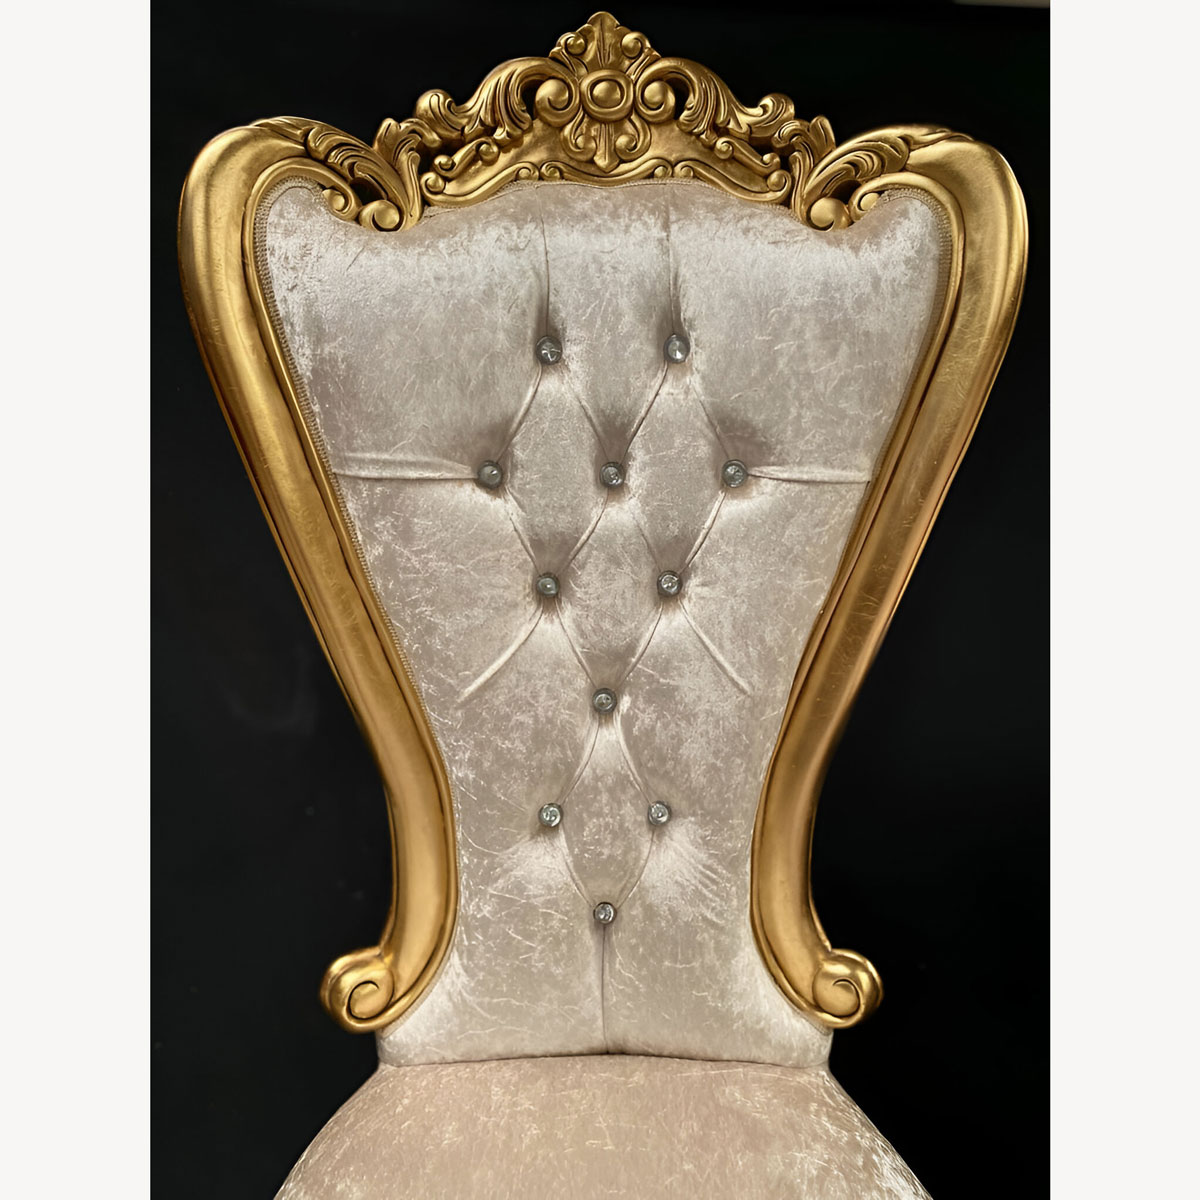 Mayfair Dining Wedding Side Throne In Gold Leaf Frame Upholstered In Ivory Cream Crushed Velvet With Crystal Buttoning 2 - Hampshire Barn Interiors - Mayfair Dining Wedding Side Throne In Gold Leaf Frame Upholstered In Ivory Cream Crushed Velvet With Crystal Buttoning -